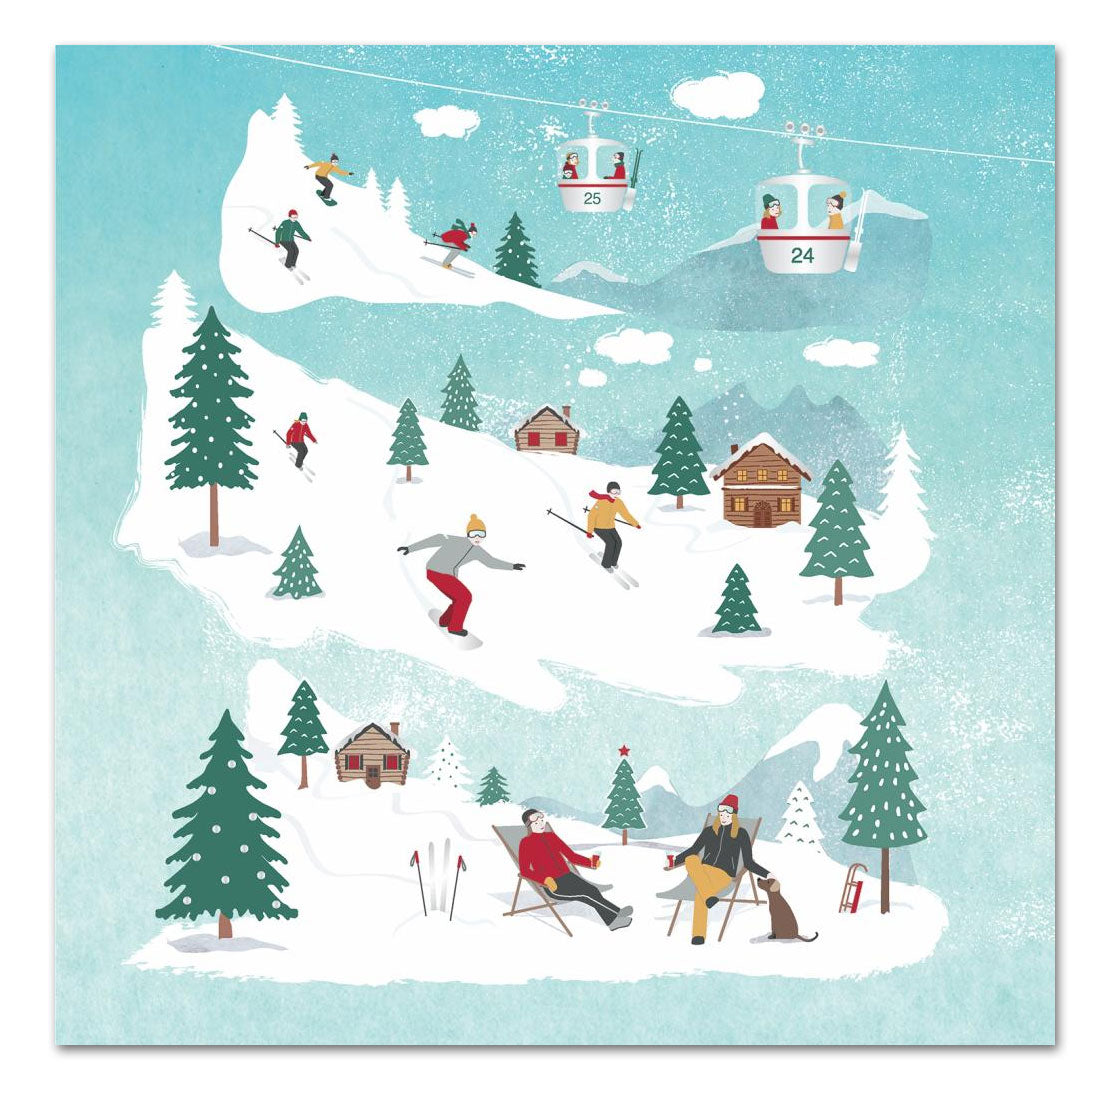 Winter Skiing at St. Moritz Paper Luncheon Napkins